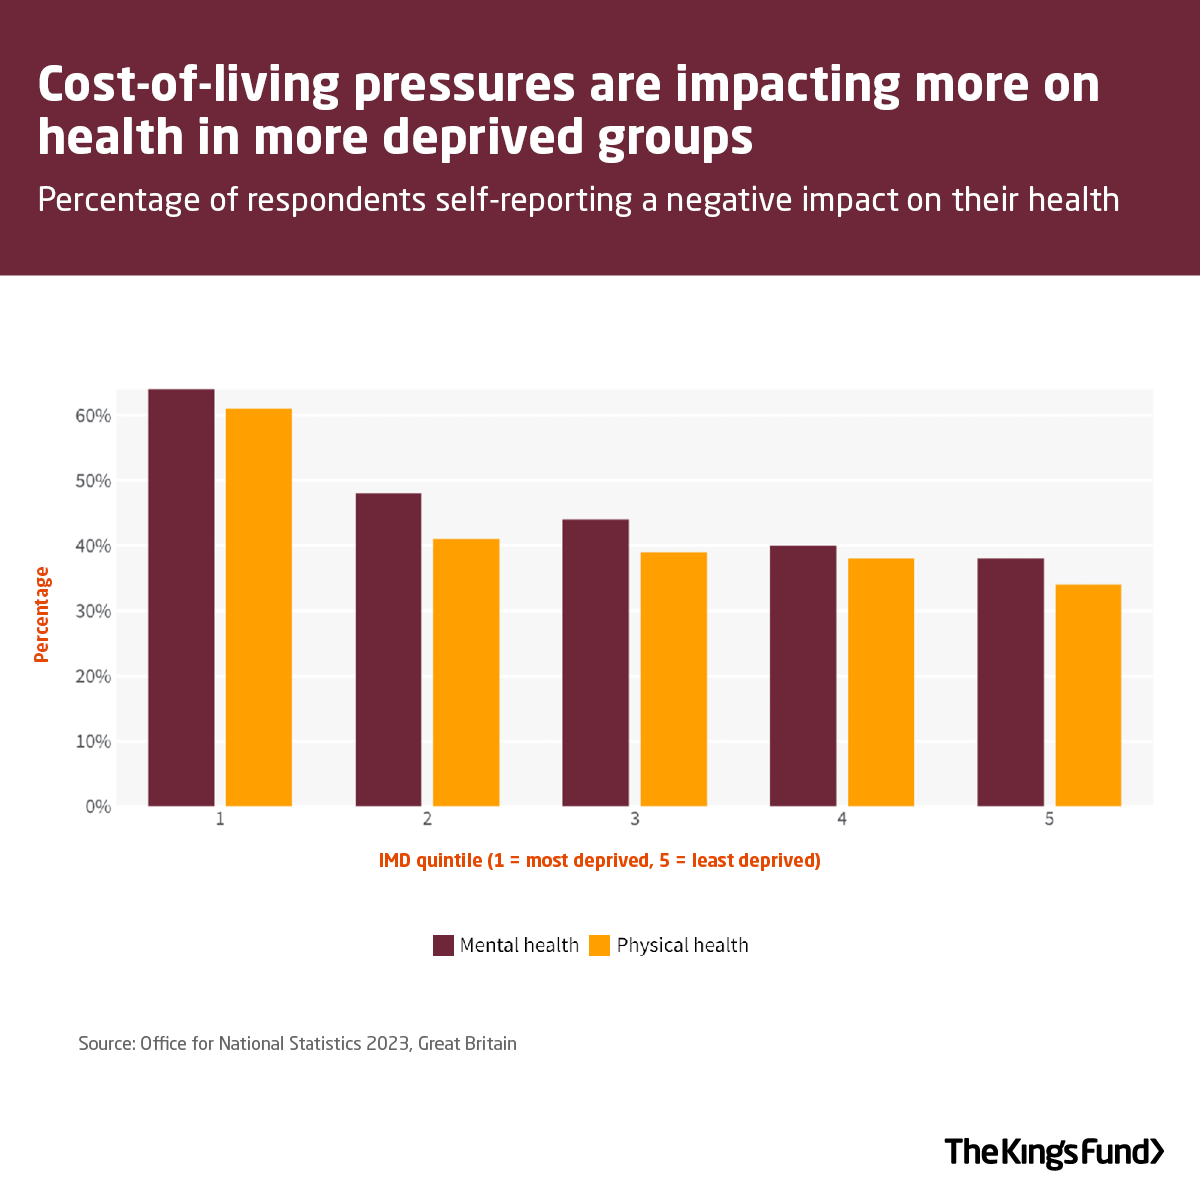 The link between poverty & poor health is a well-known issue. Our long read shows that 49% of people in the most deprived areas report that the cost-of-living squeeze is impacting their physical health. Find out more: kingsfund.org.uk/insight-and-an…